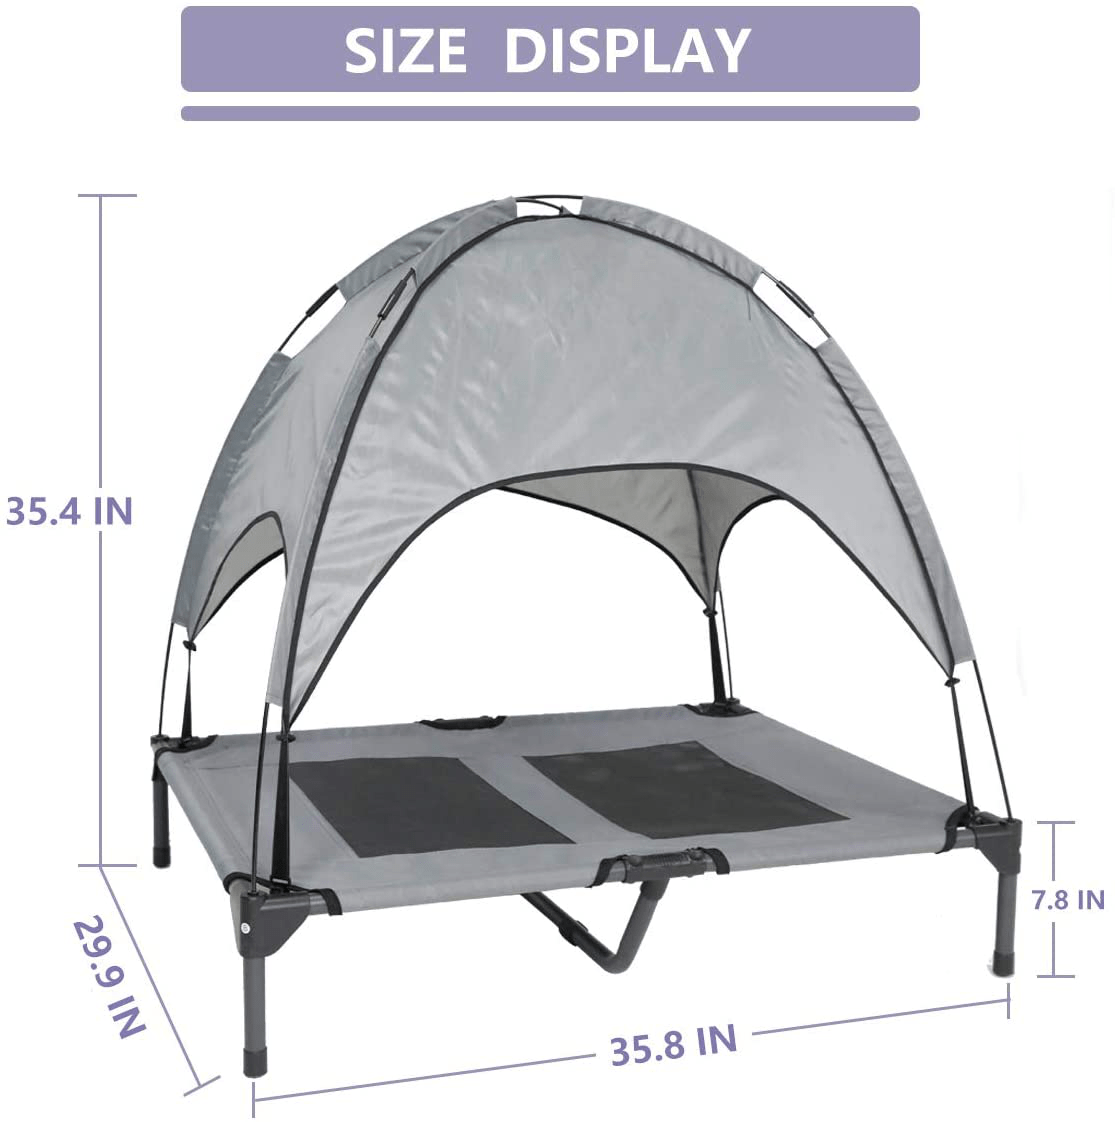 A.FATI Elevated Dog Bed,Cooling Raised Dog Bed Outdoor & Indoor Dog Cot Bed for Large Dogs with Removable Canopy Shade Tent with Extra Bag, Portable for Camping, Traveling, Beach, Training Use Animals & Pet Supplies > Pet Supplies > Dog Supplies > Dog Houses A.FATI   